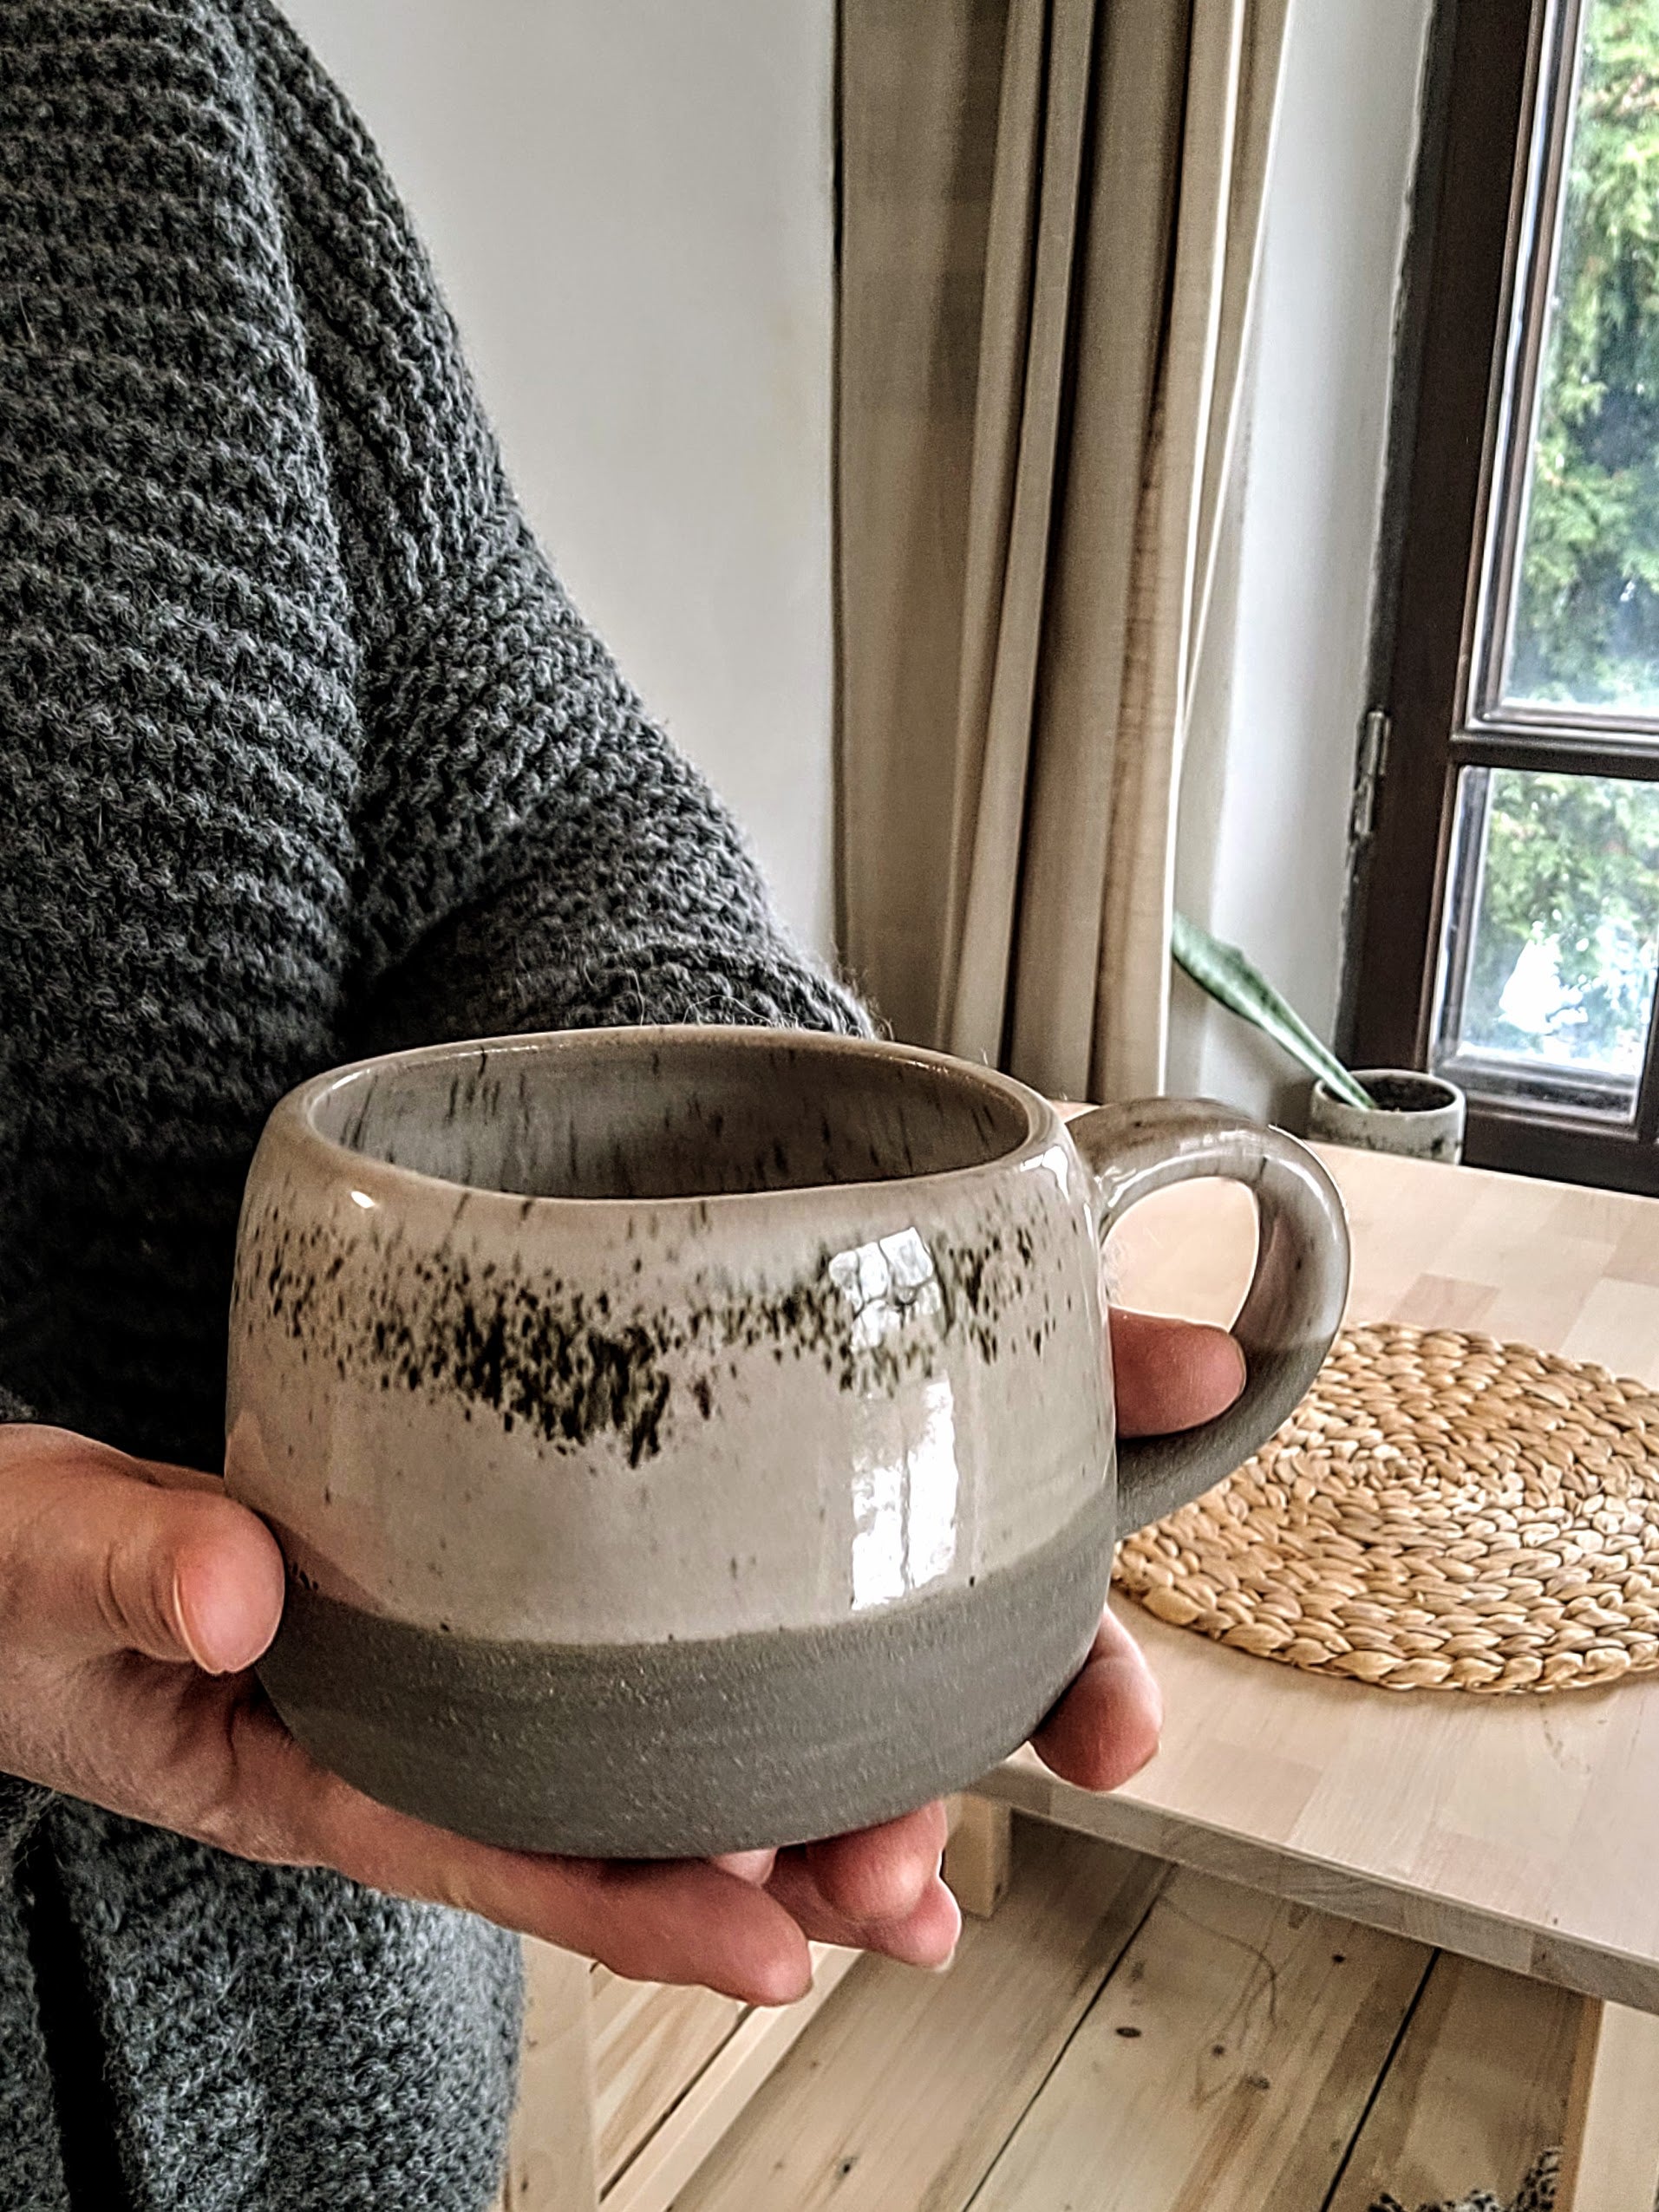 Treat yourself to the best! This handmade ceramic mug is perfect for your morning coffee, or a nice hot cup of tea on a cold winter's day.